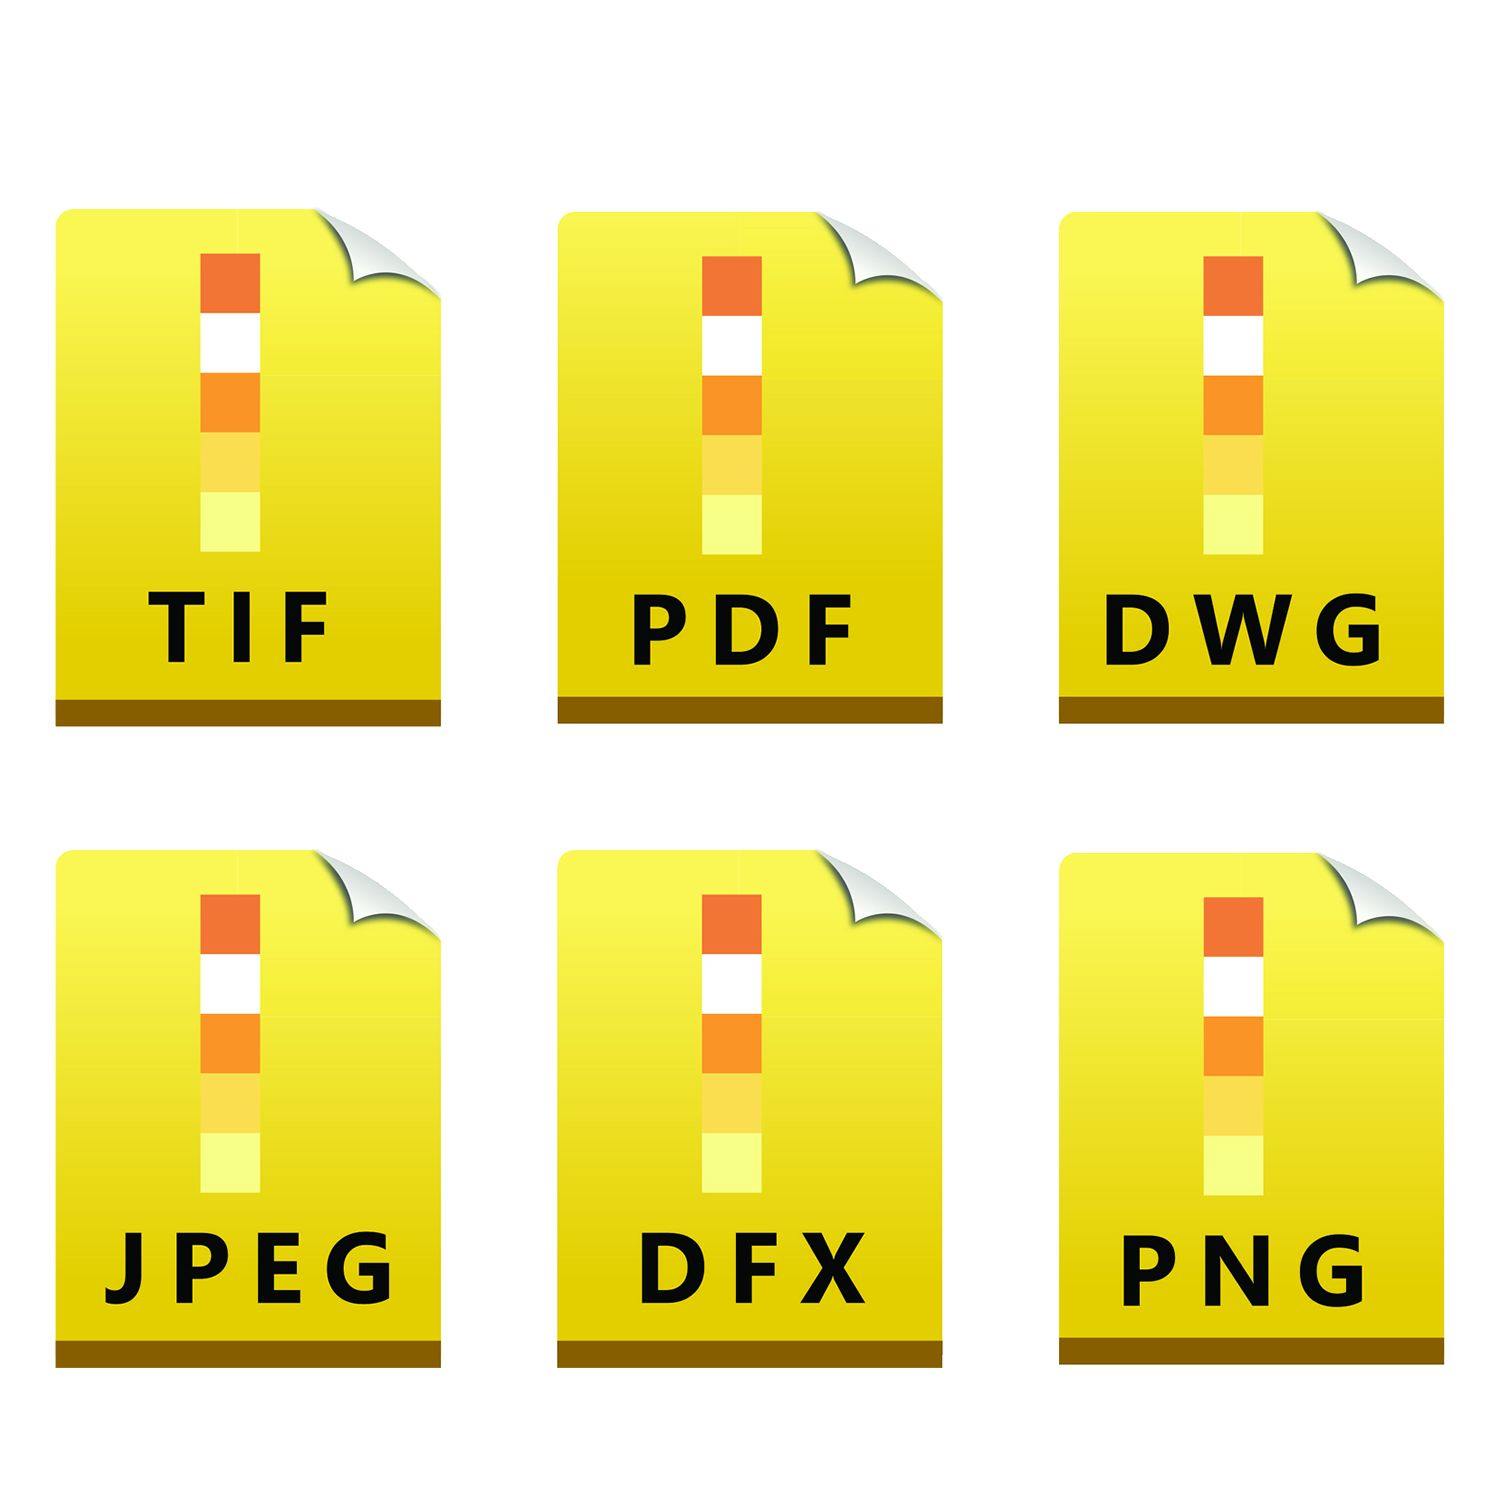 Professional eSeal Electronic Image Stamp of Seals showing availability in different formats like PNG, DWG, JPG, DXF, PDF, and TIF